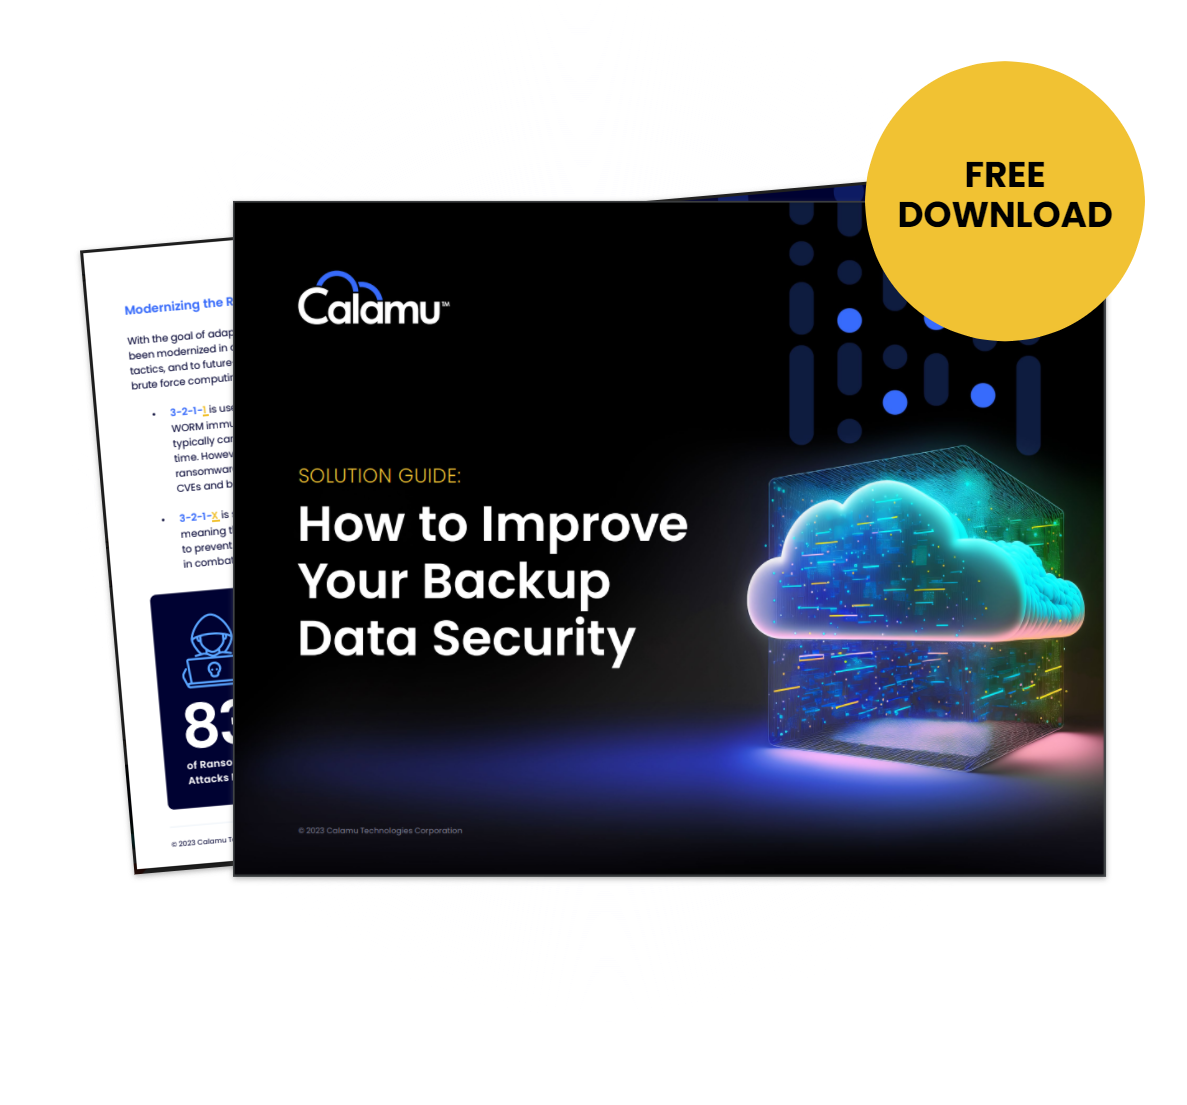 How to Improve Your Backup Data Security